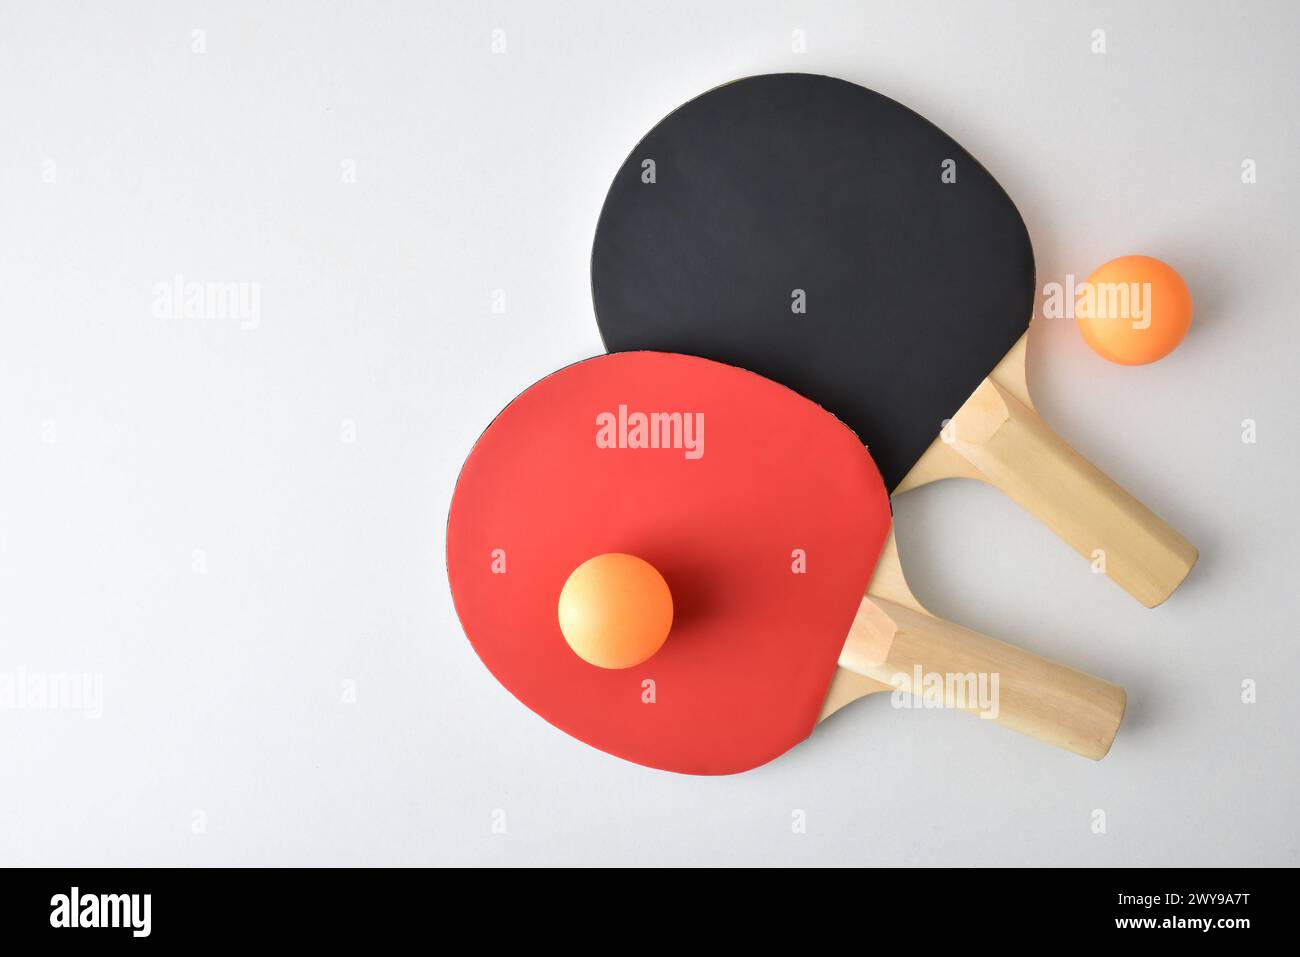 Two table tennis rackets and two orange balls isolated on white table. Top view. Stock Photo